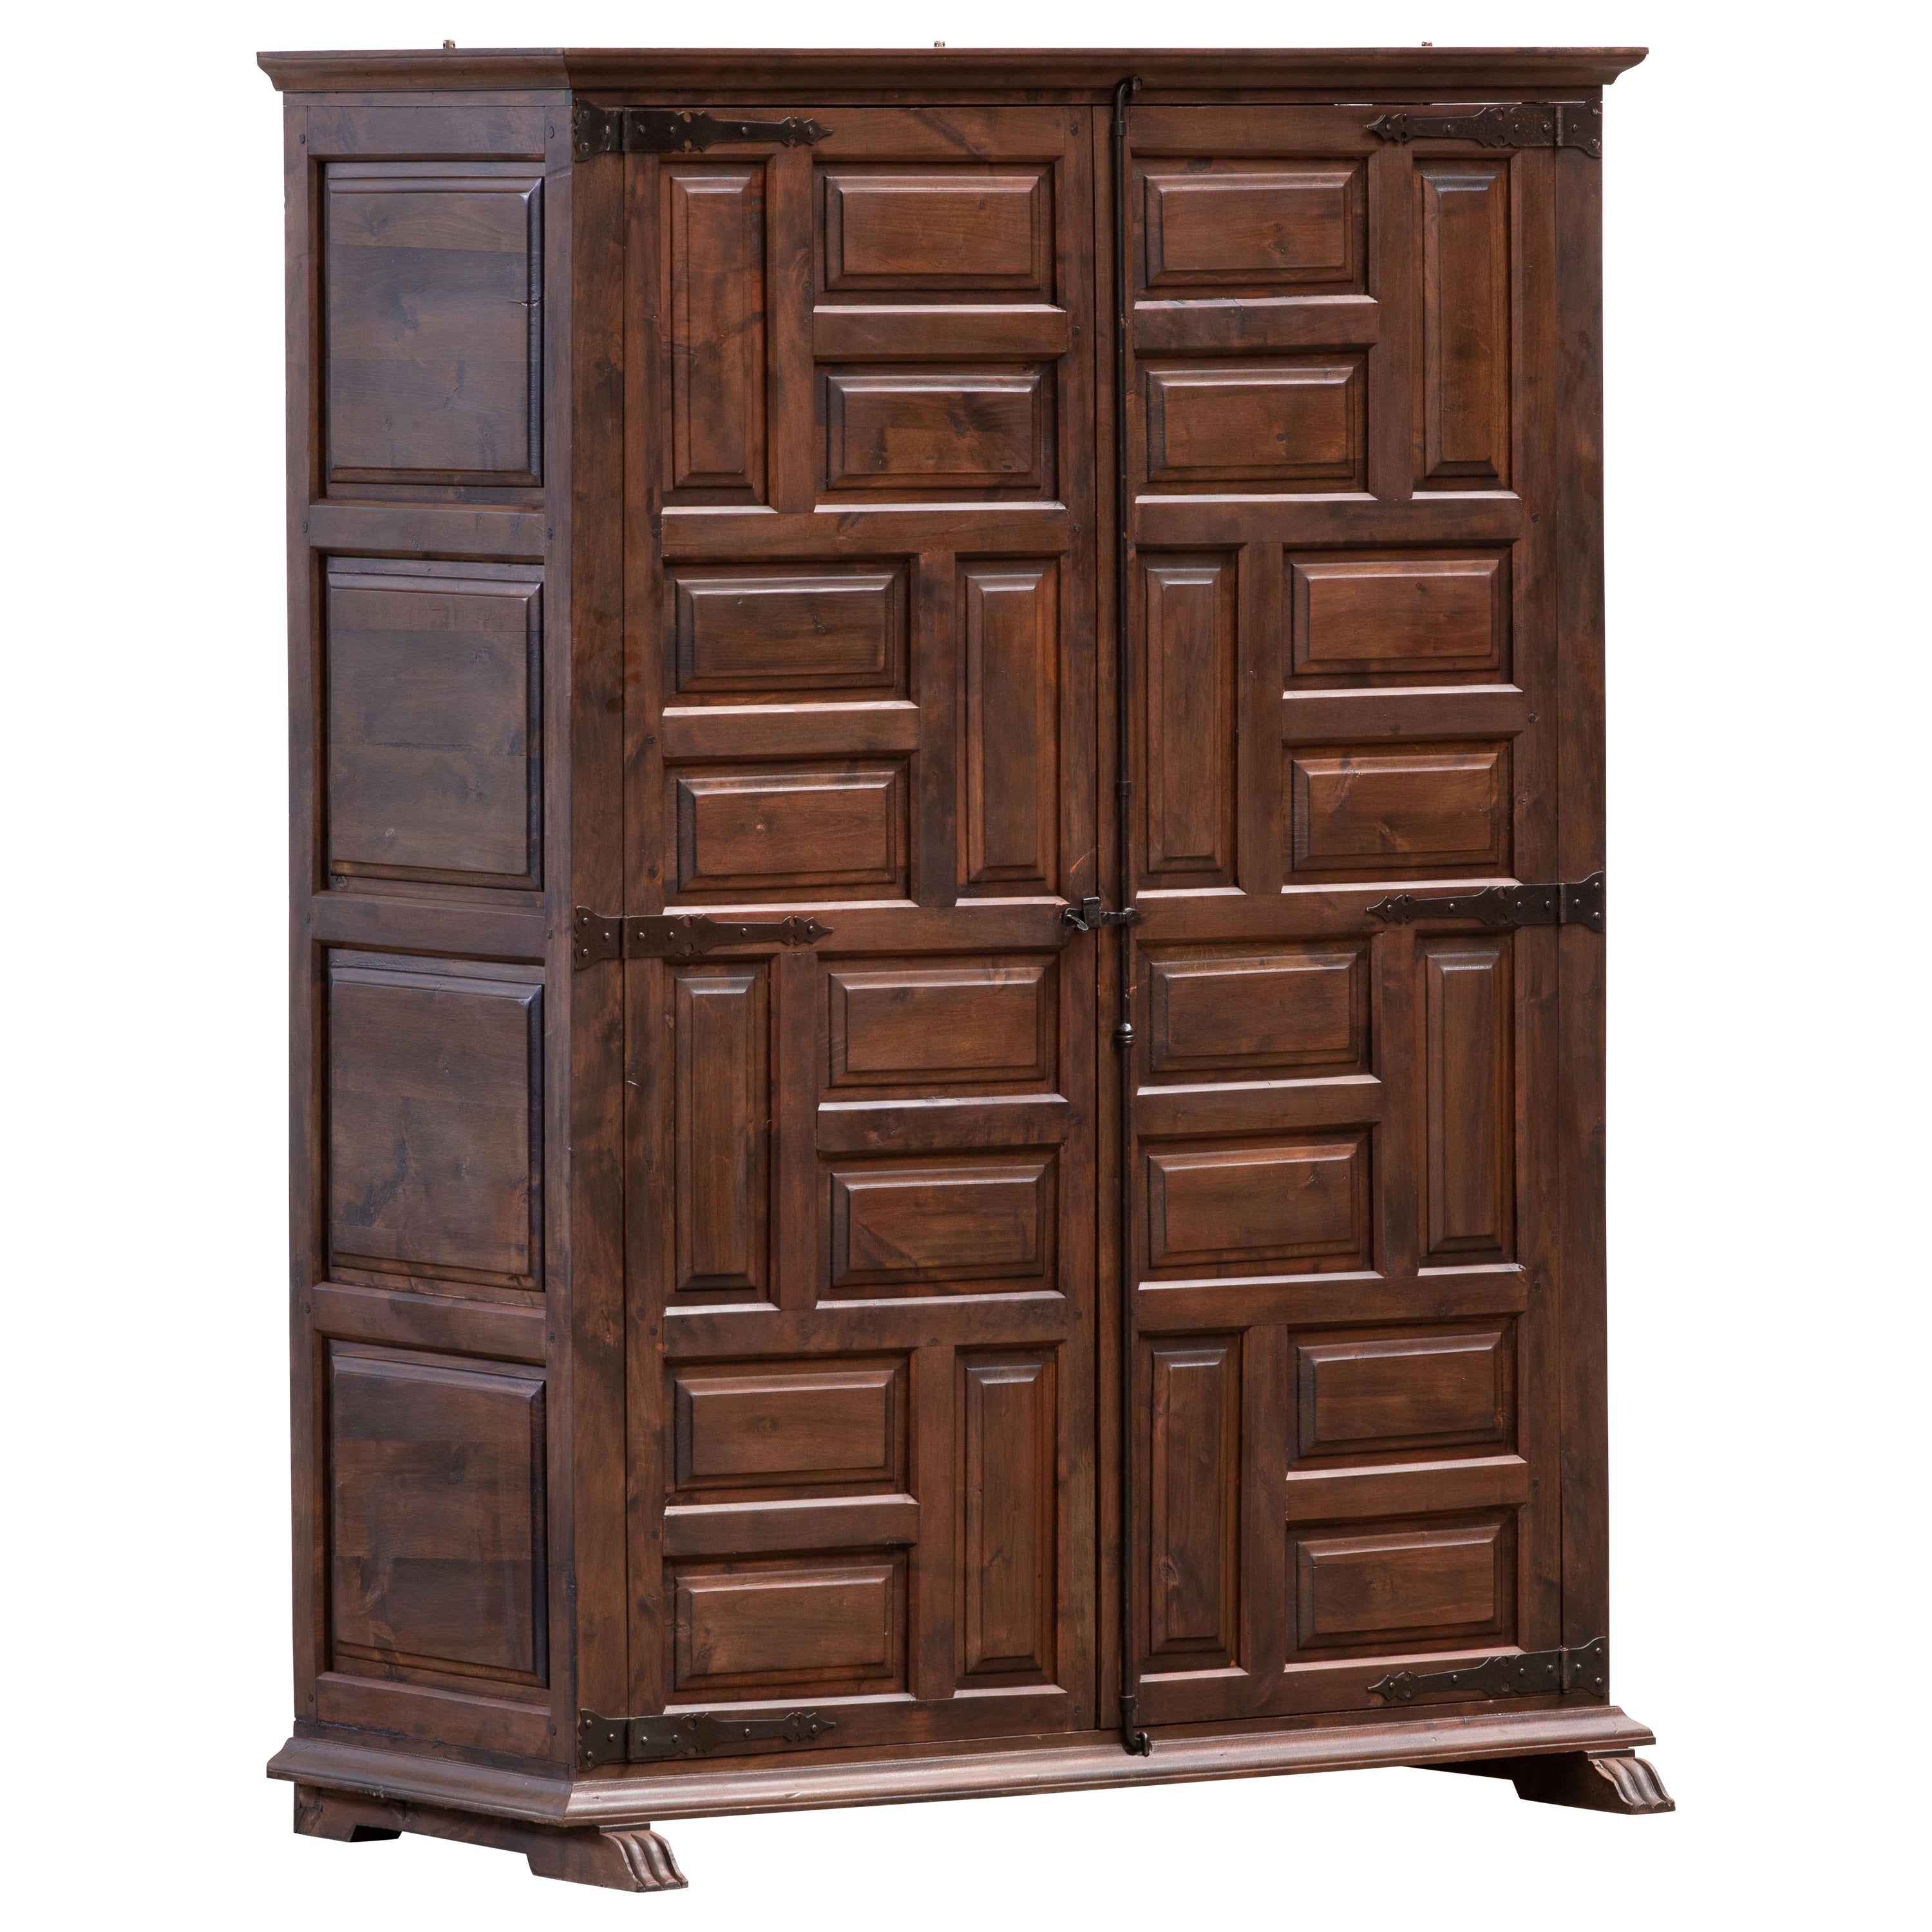 19th Catalan Spanish Baroque Carved Walnut Tuscan Two doors Wardrobe or Cabinet